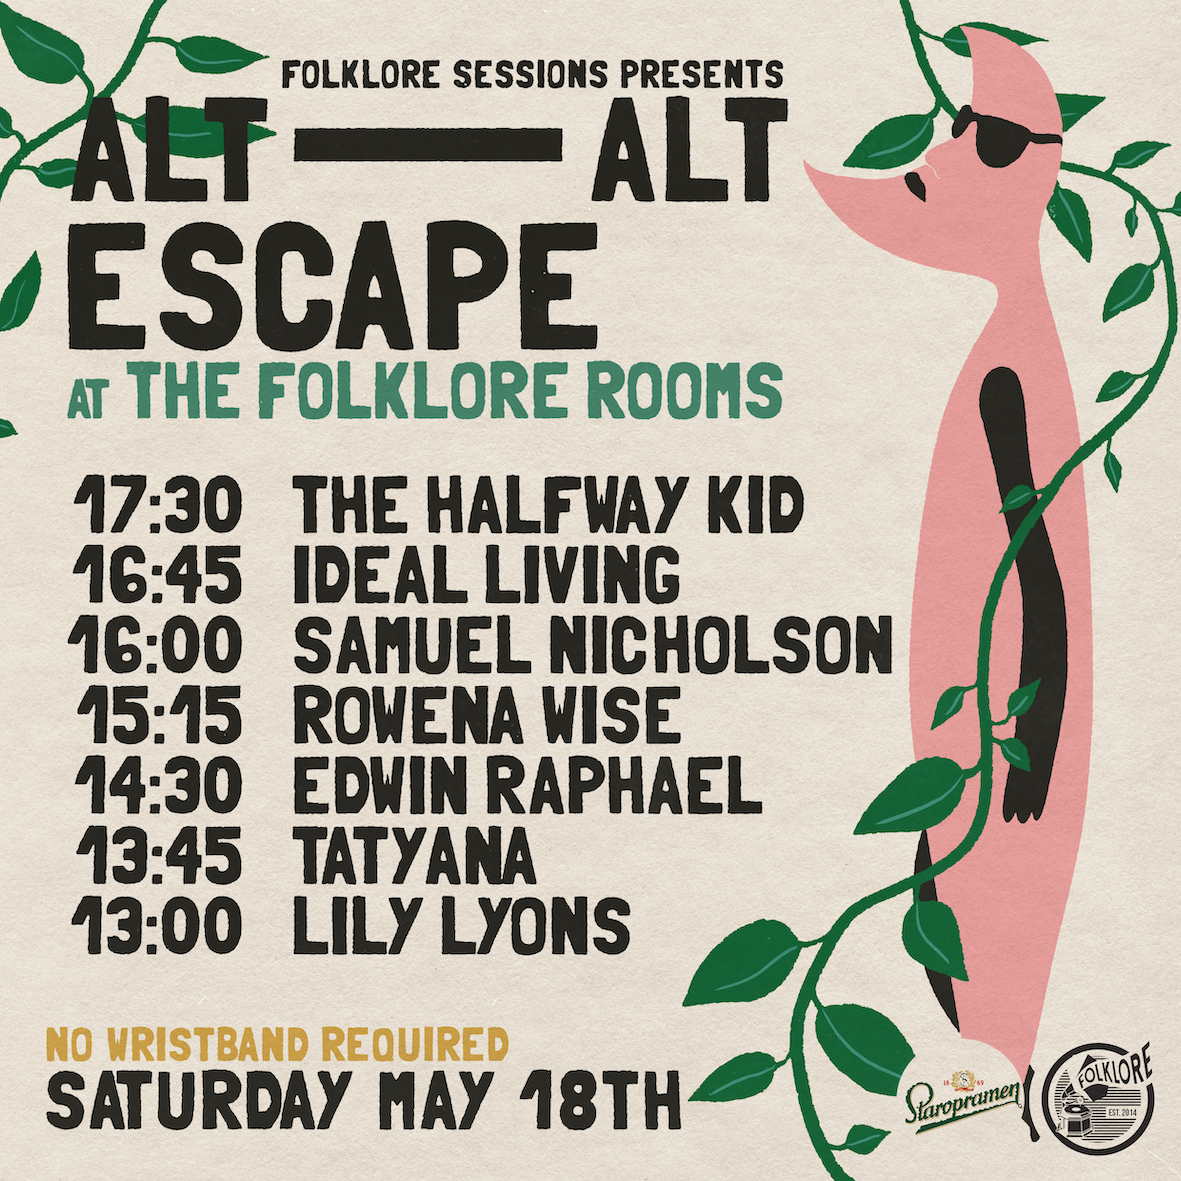 Really proud of this Alt Alt Escape that @folkloresession has put together at our house, @folklorerooms 🖤 Free Entry No Wristband required Not funded by Barclays Music from the community for the community and look at that line up! Jx